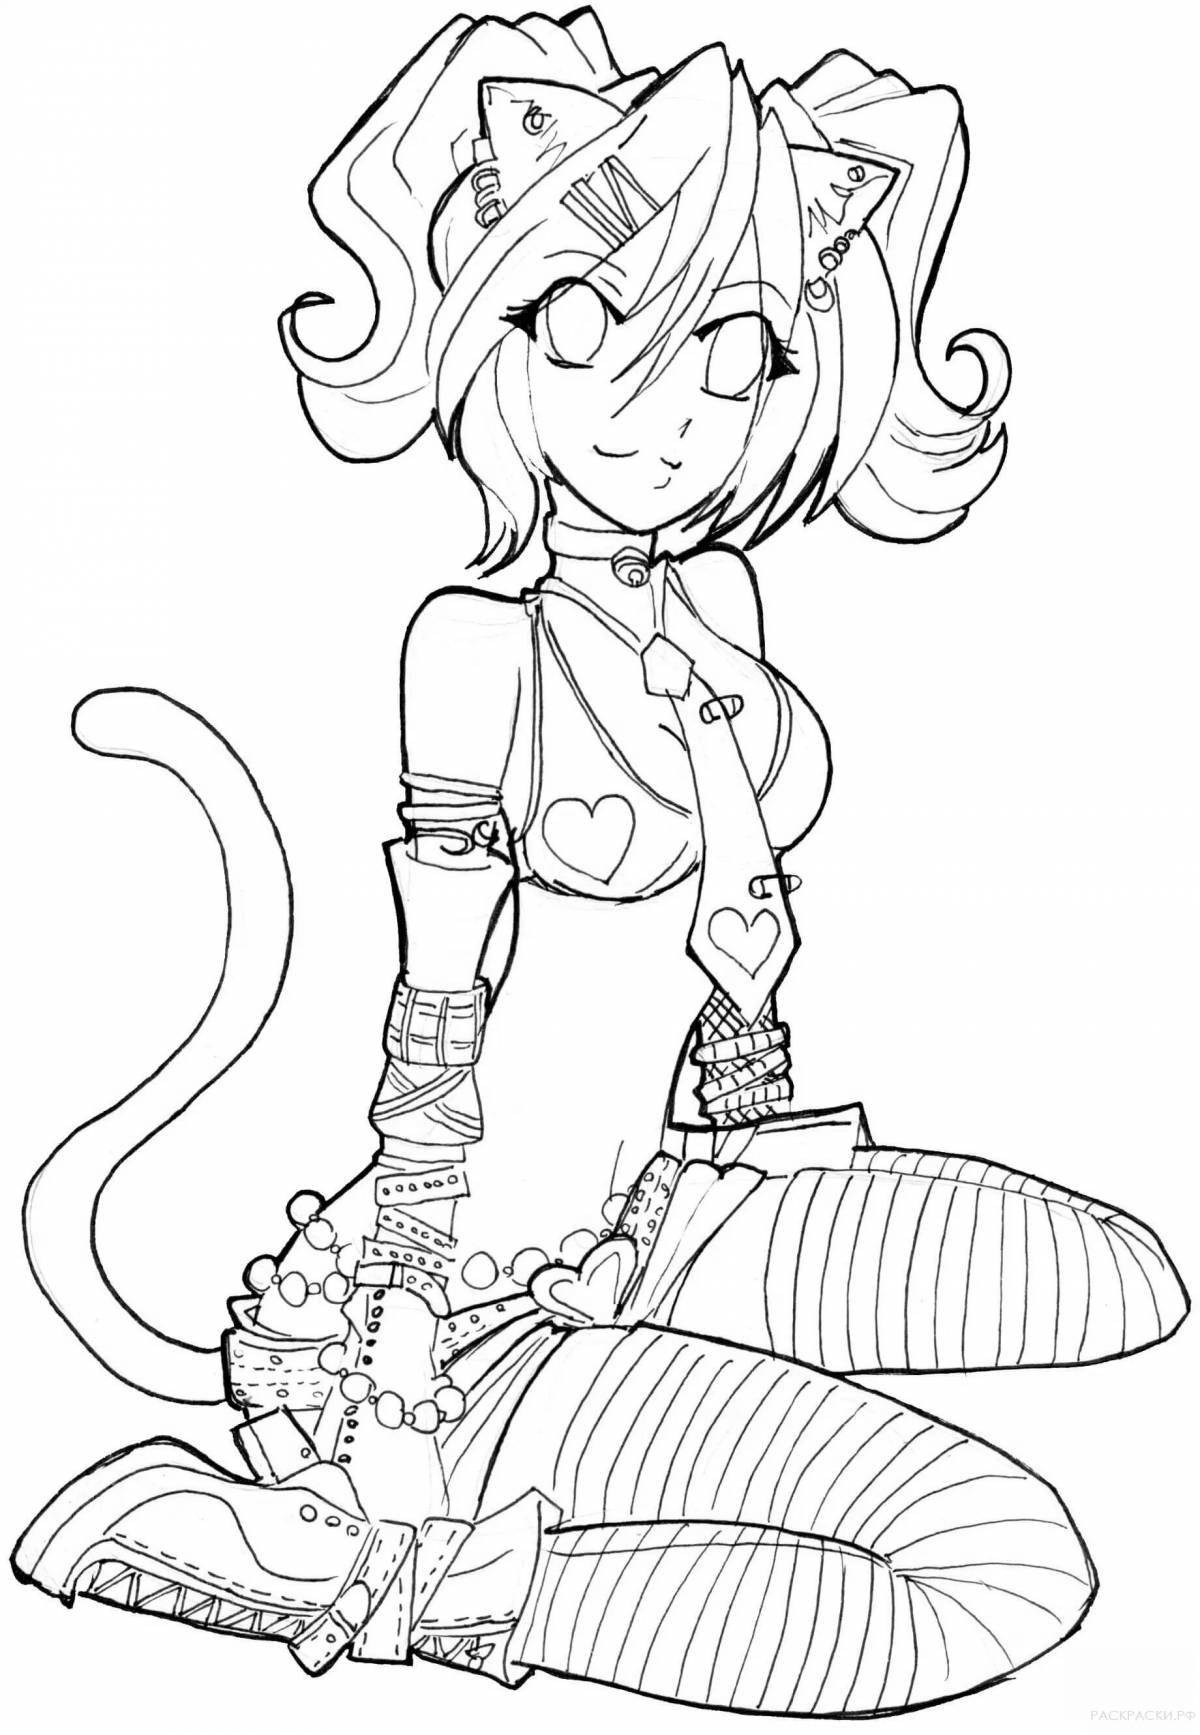 Delightful anime kitty coloring page